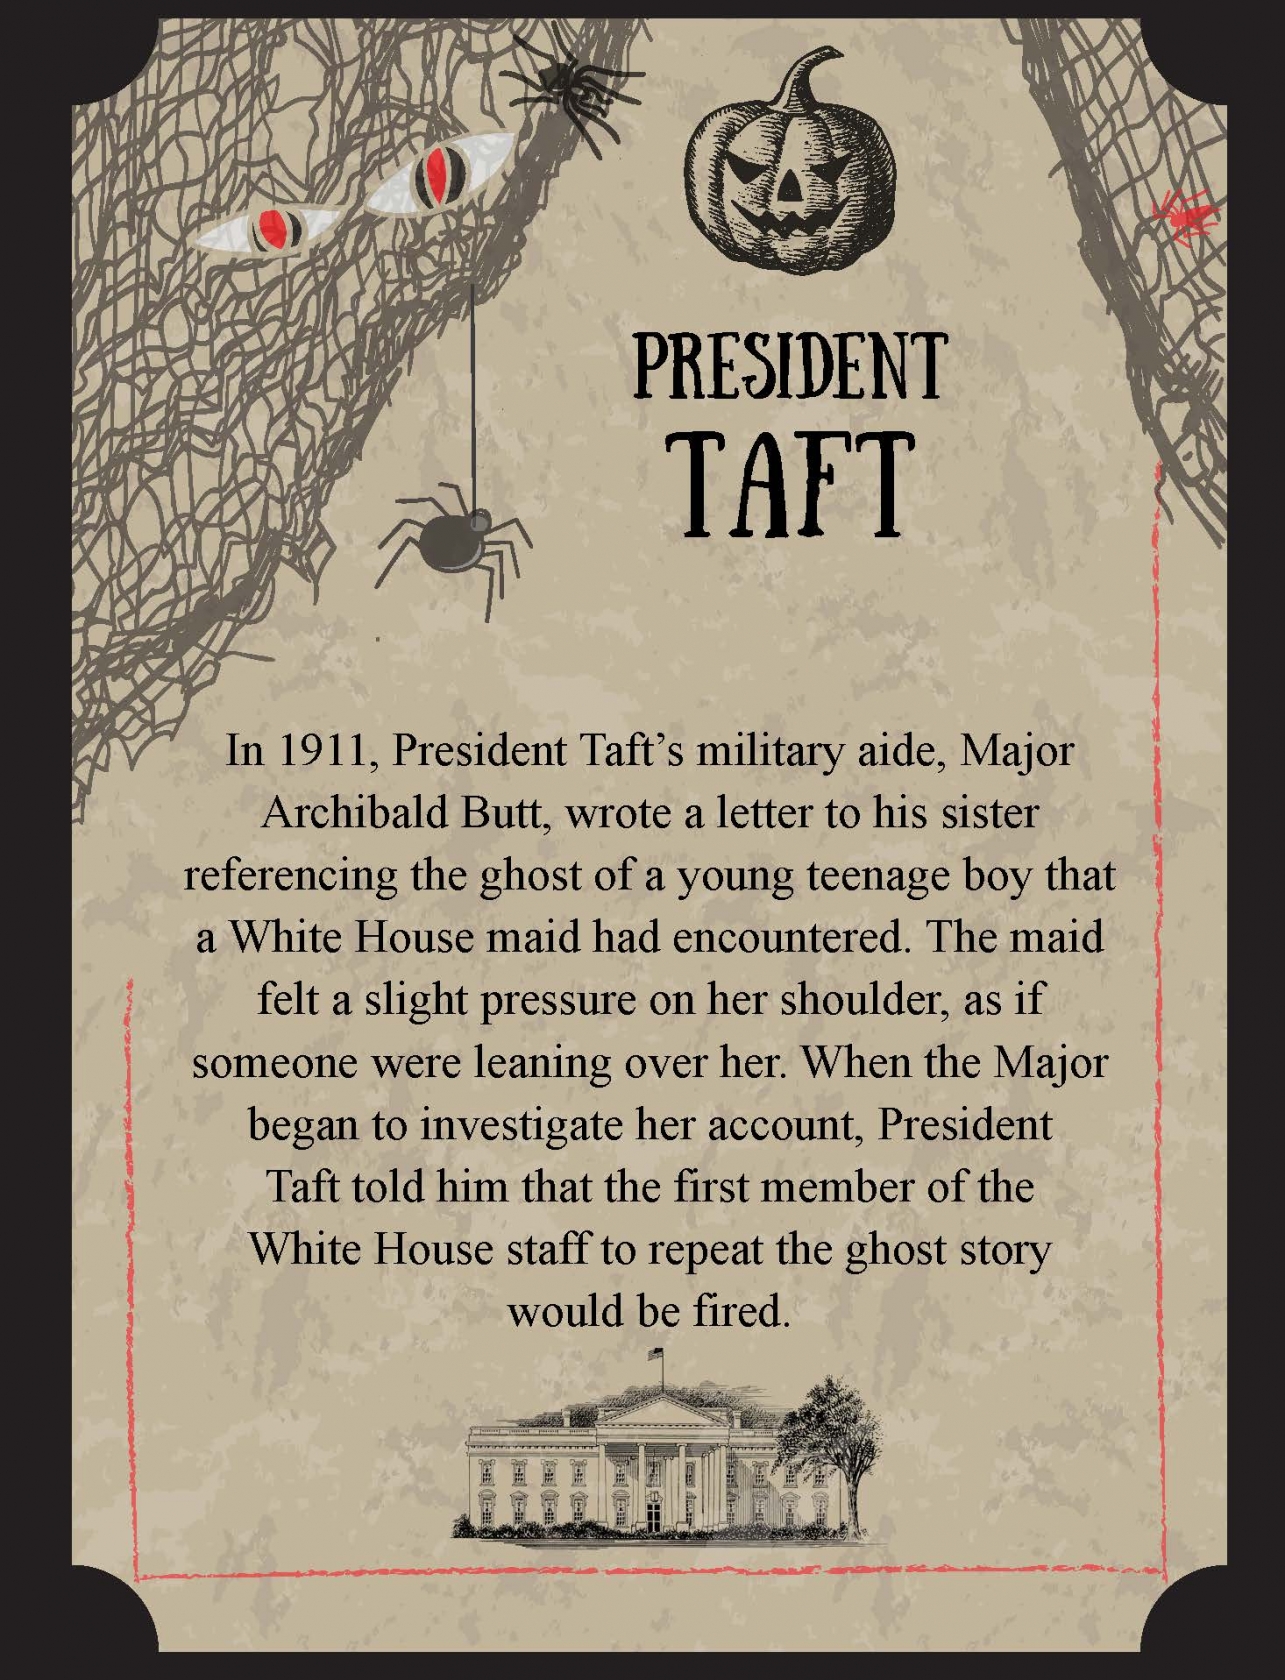 In 1911, President Taft’s military aide, Major Archibald Butt, wrote a letter to his sister referencing the ghost of a young teenage boy that a White House maid had encountered. The maid felt a slight pressure on her shoulder, as if someone were leaning over her. When the Major began to investigate her account, President Taft told him that the first member of the White House staff to repeat the ghost story would be fired.